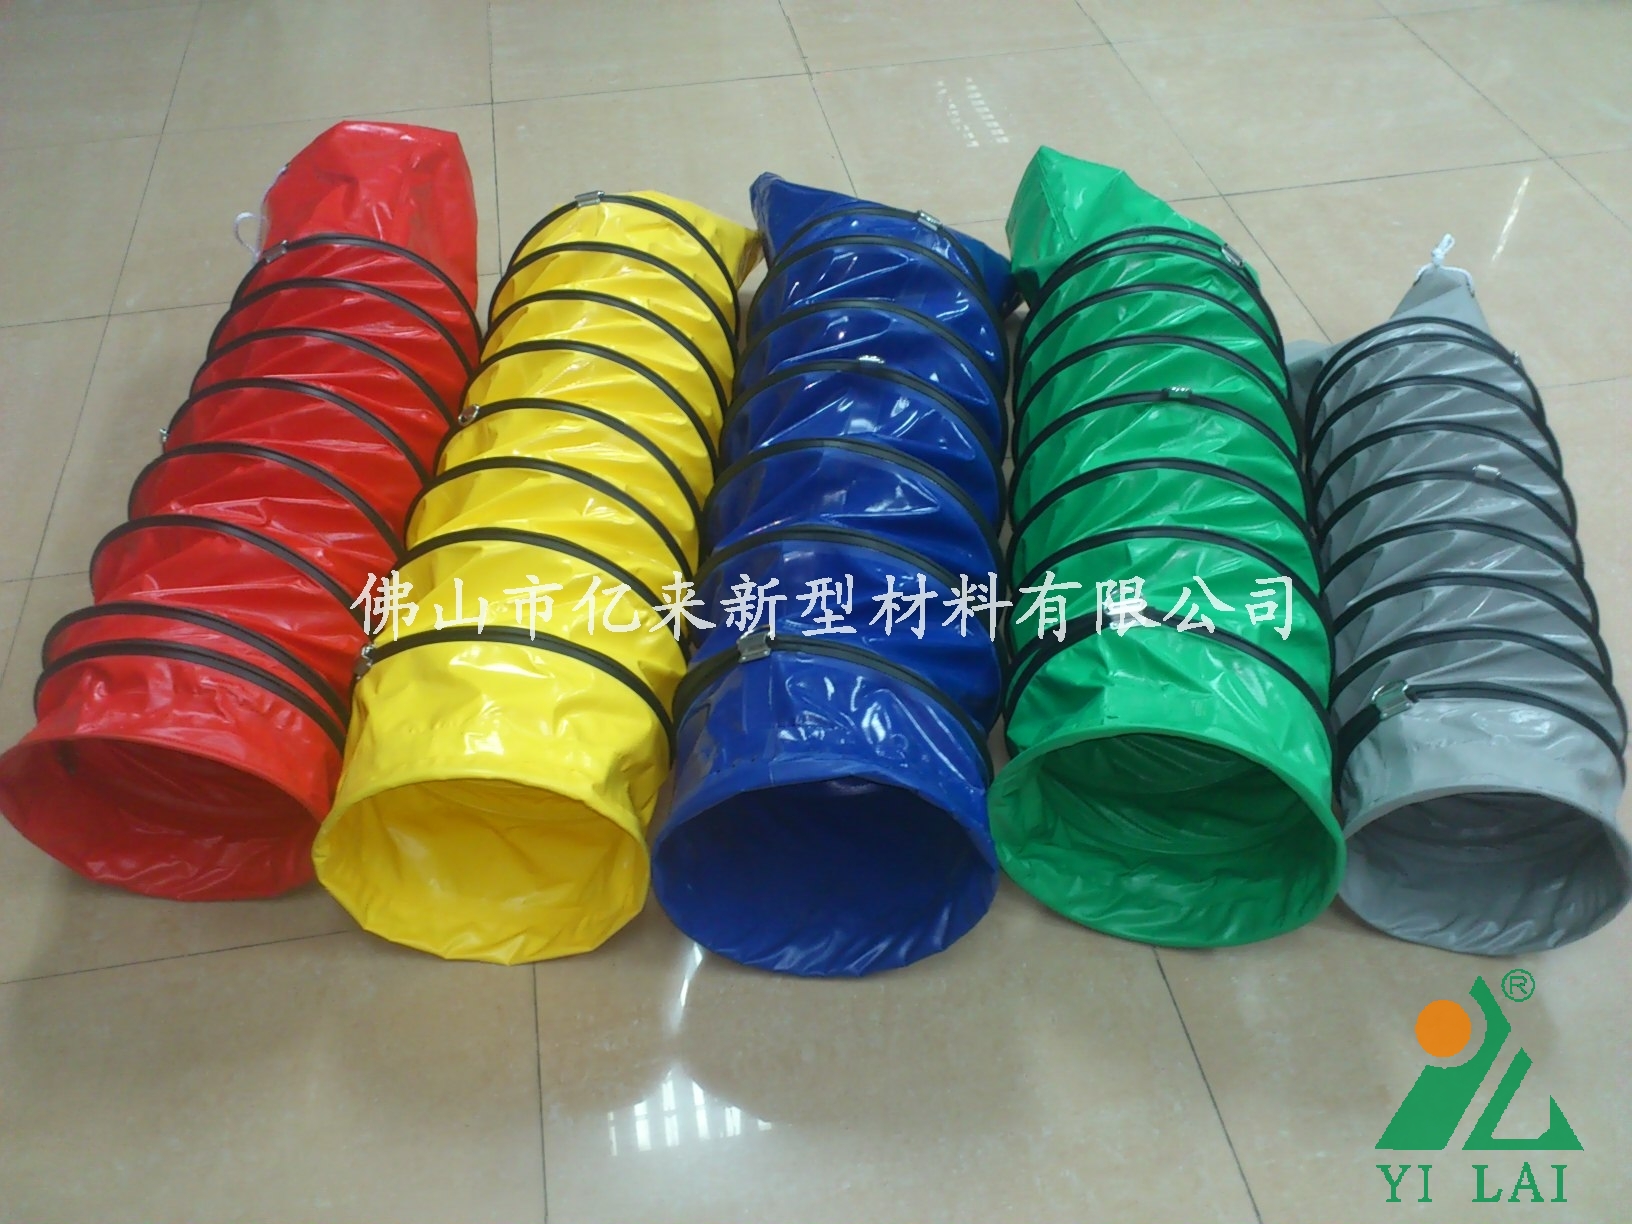 heat resistant and fire rated pvc flexible duct